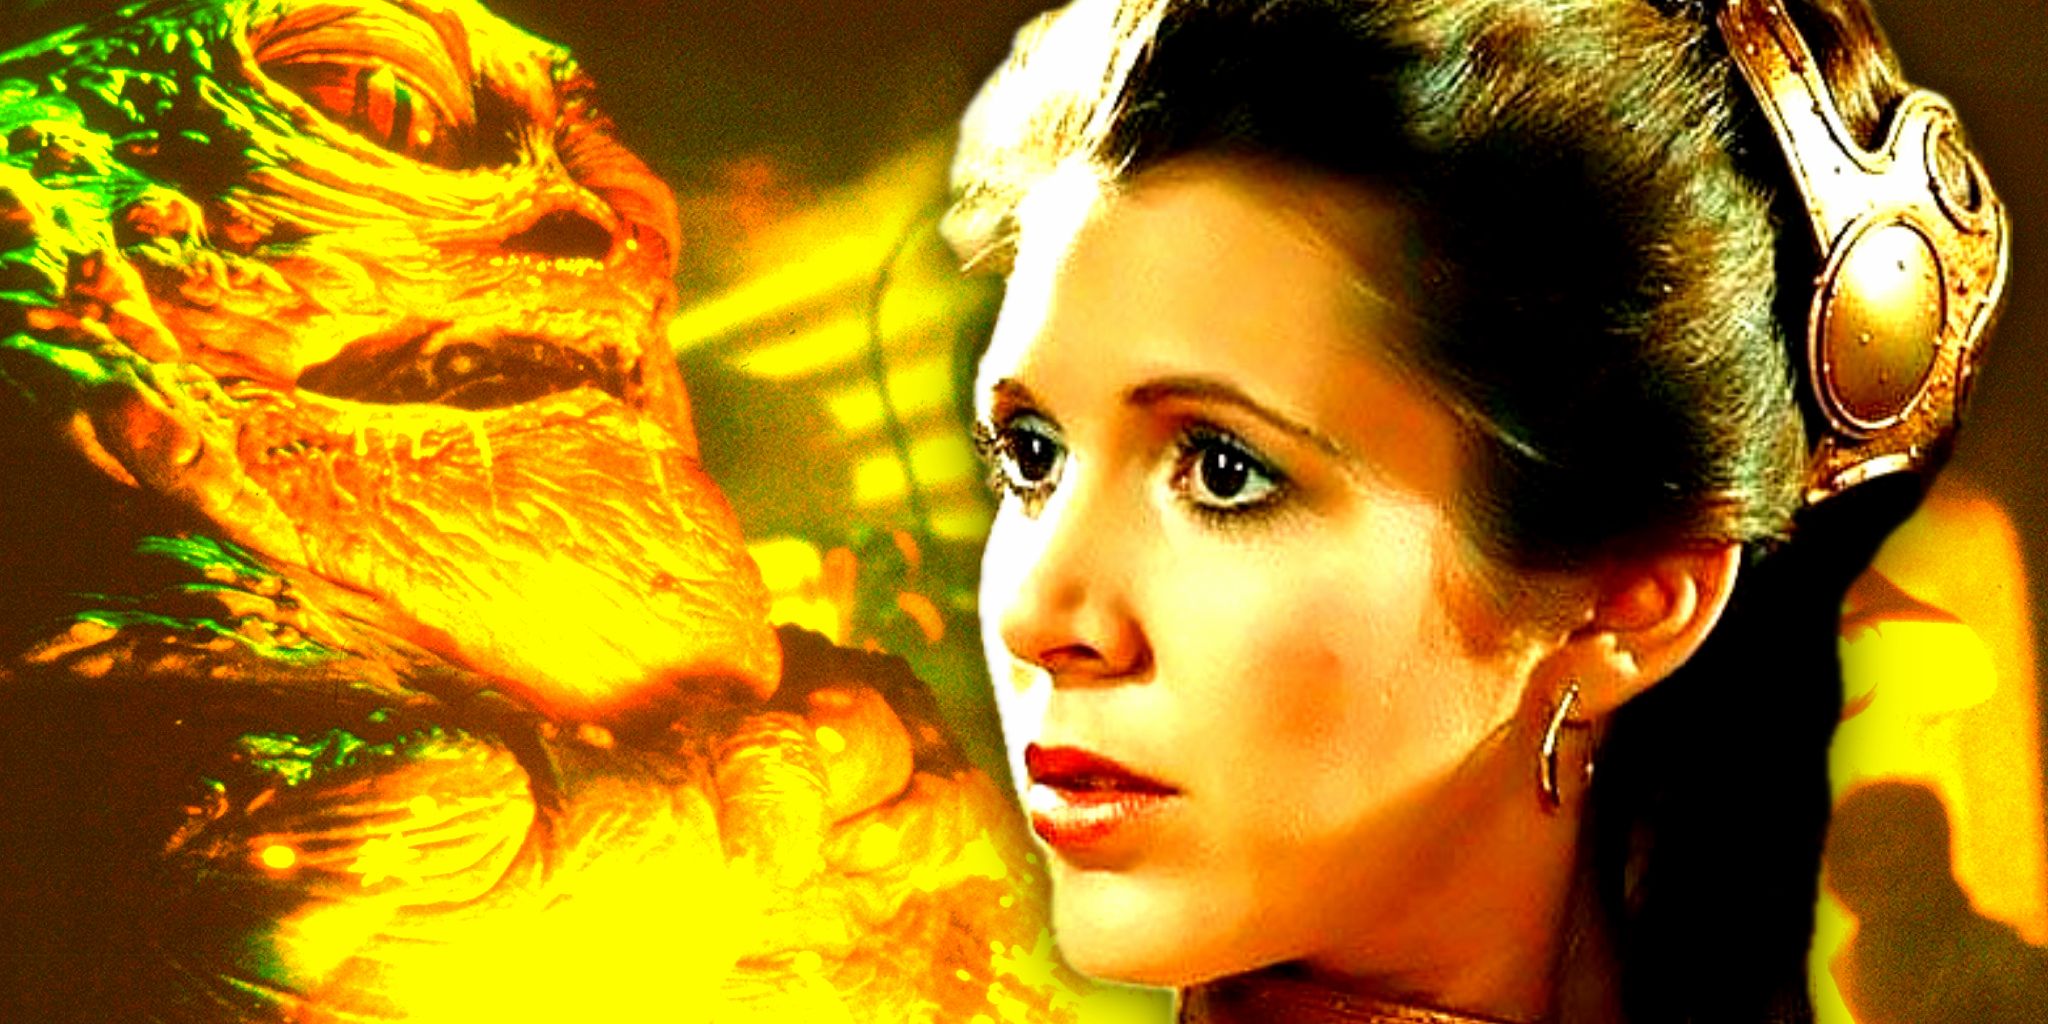 Leia Organa in her Huttslayer hair superimposed over her killing Jabba the Hutt in Return of the Jedi